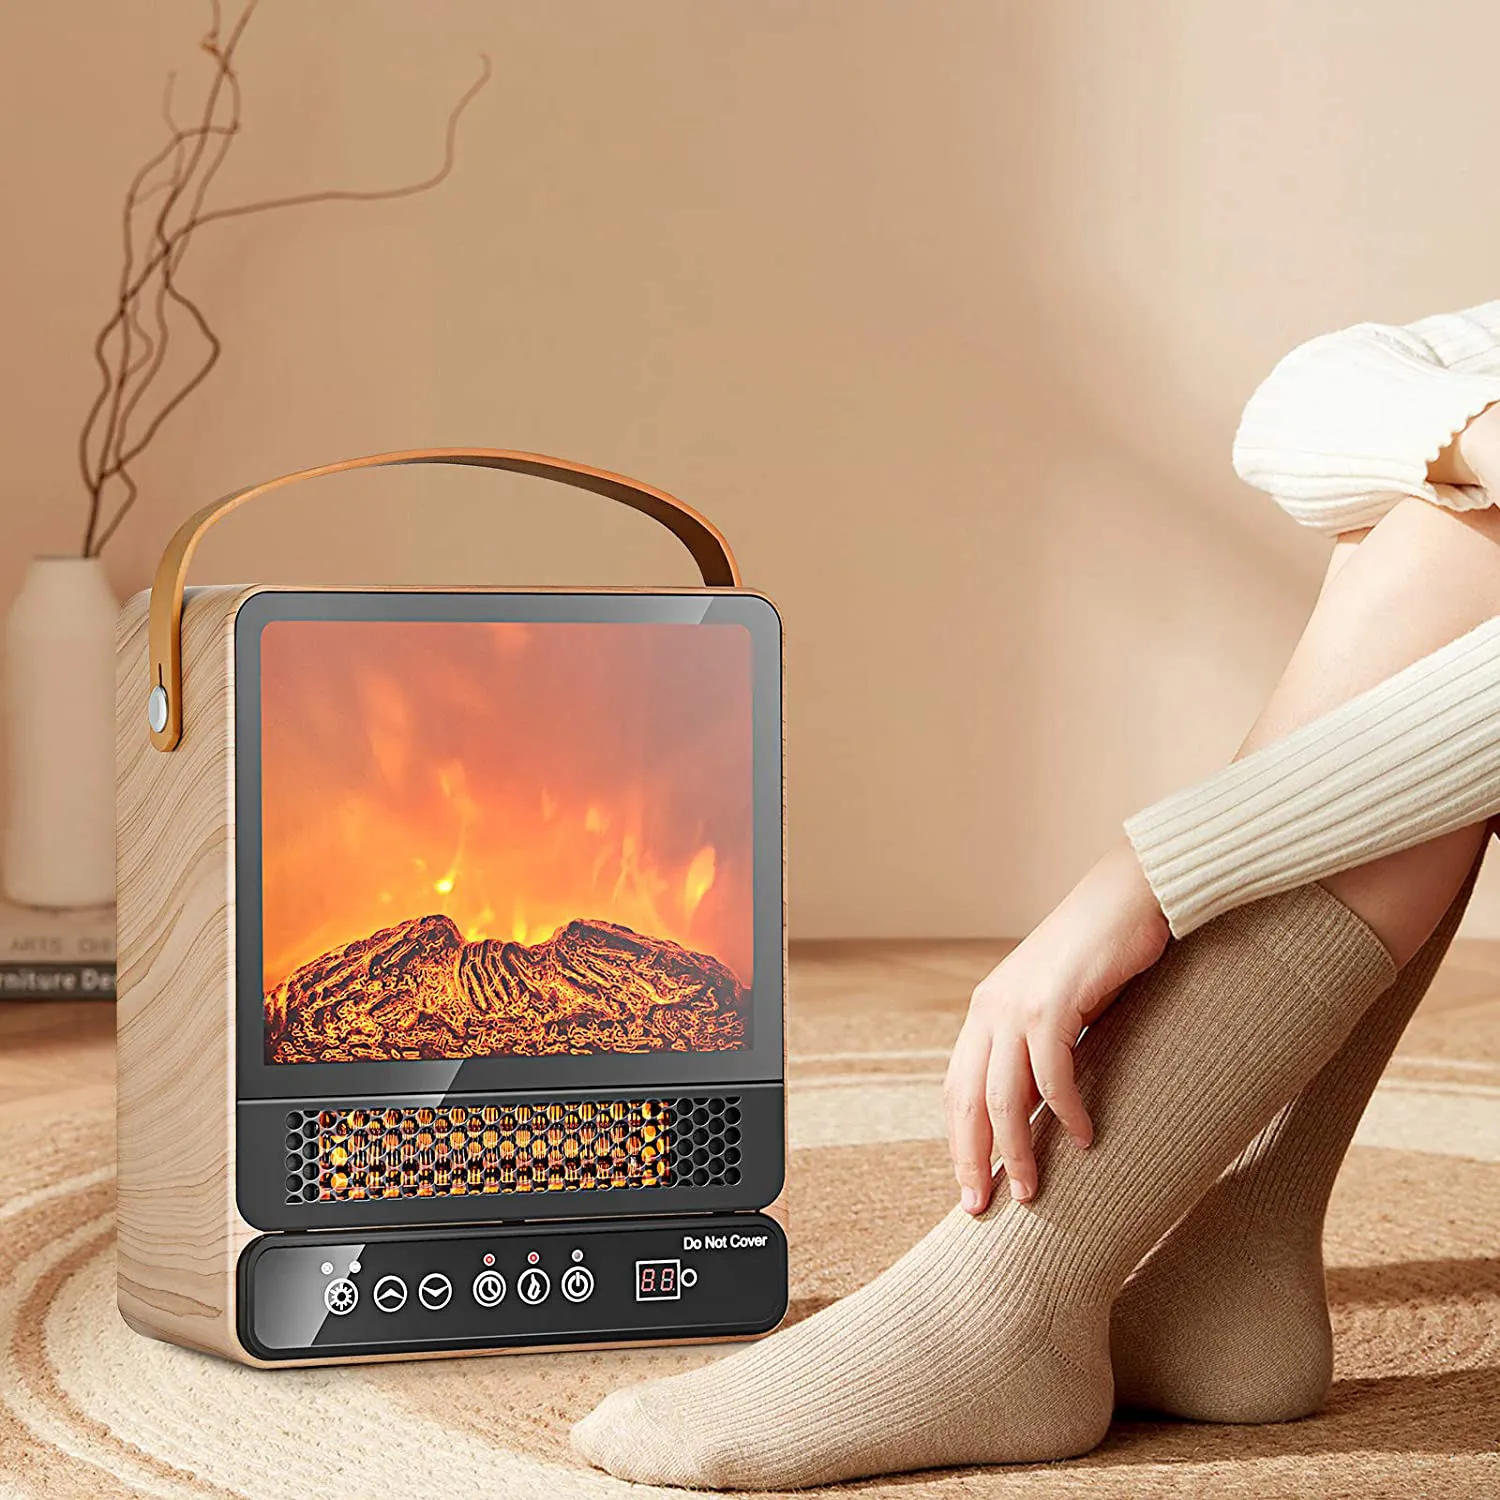 Portable LED 1500W Overheat Wire Thermostat control Heater fireplace with Power indicator light